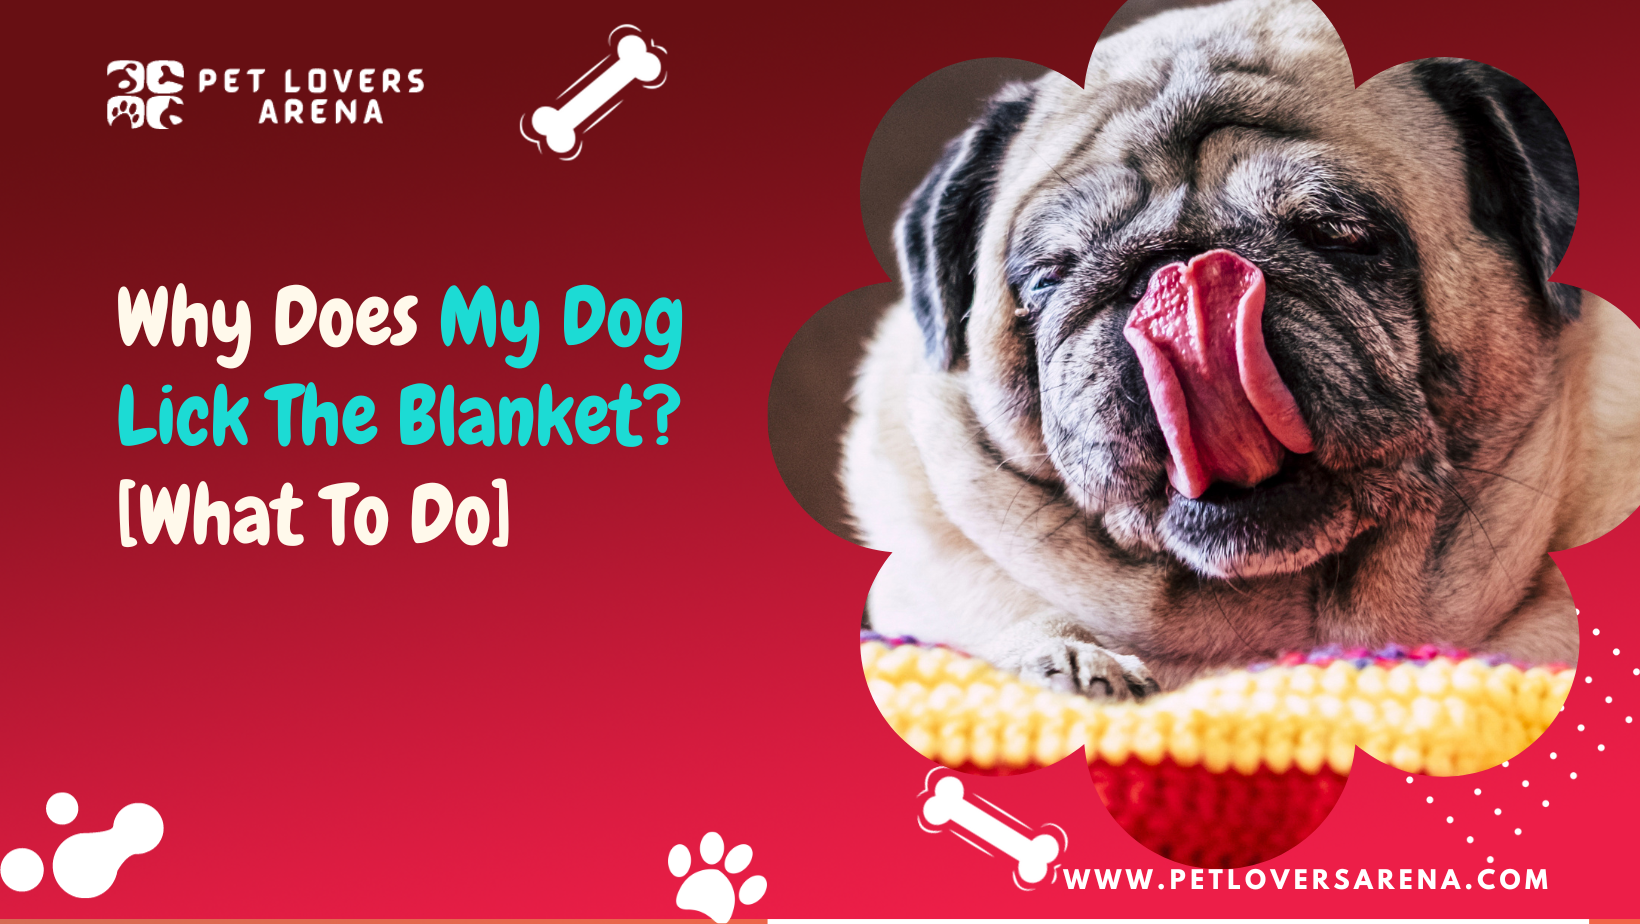 Why Does My Dog Lick The Blanket?